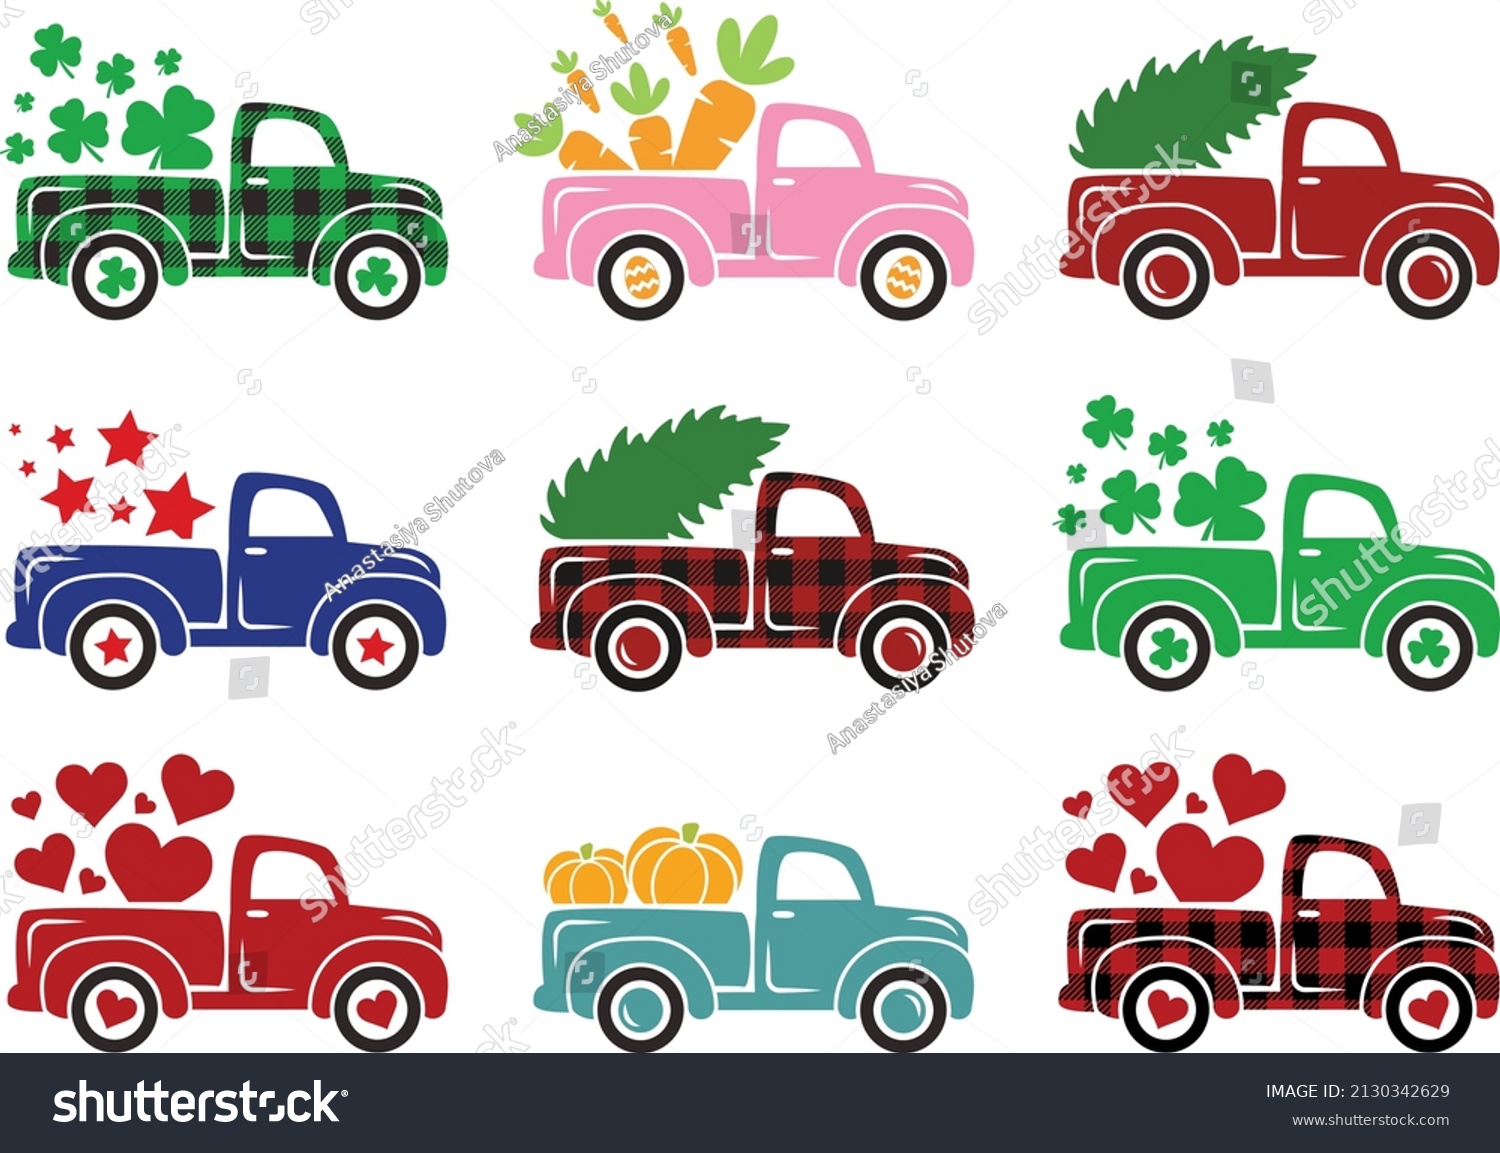 SVG of Different holidays truck Svg bundle isolated on white background. Cute vintage old truck cut files - Christmas, Easter, 4th of July, Valentine's day, St Patrick's day, Fall pumpkins pickup svg